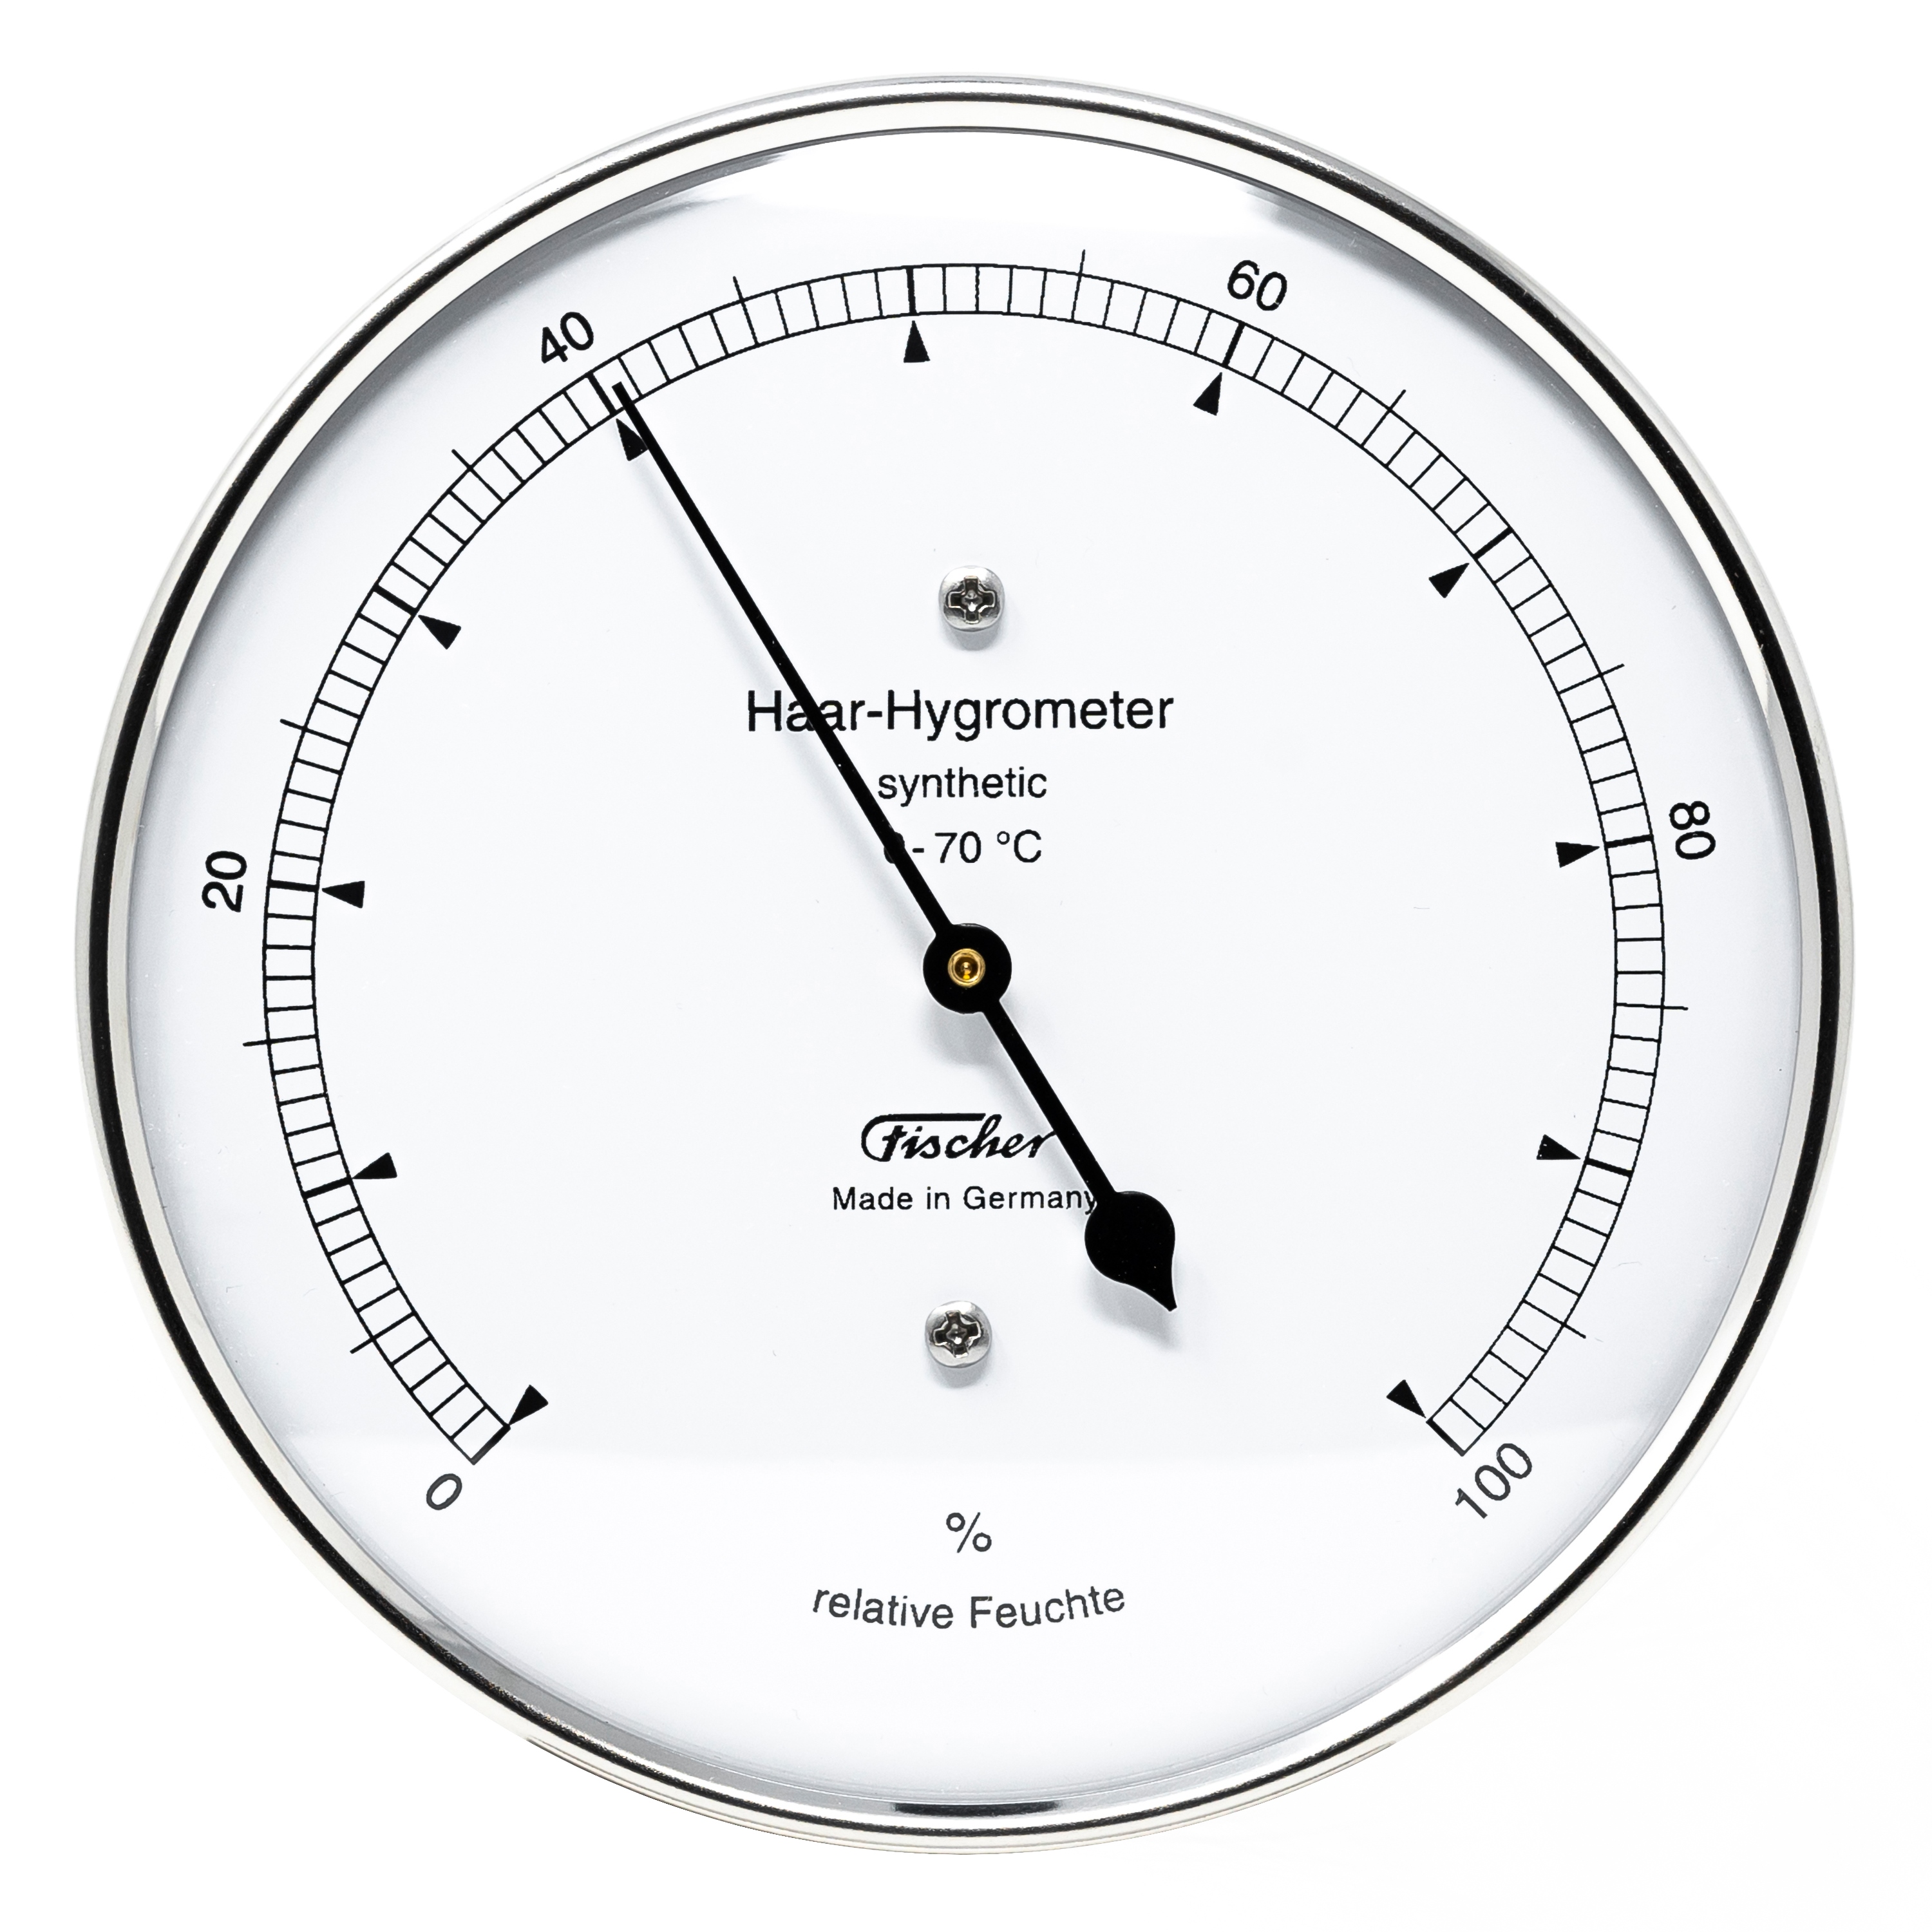 What is a hygrometer?